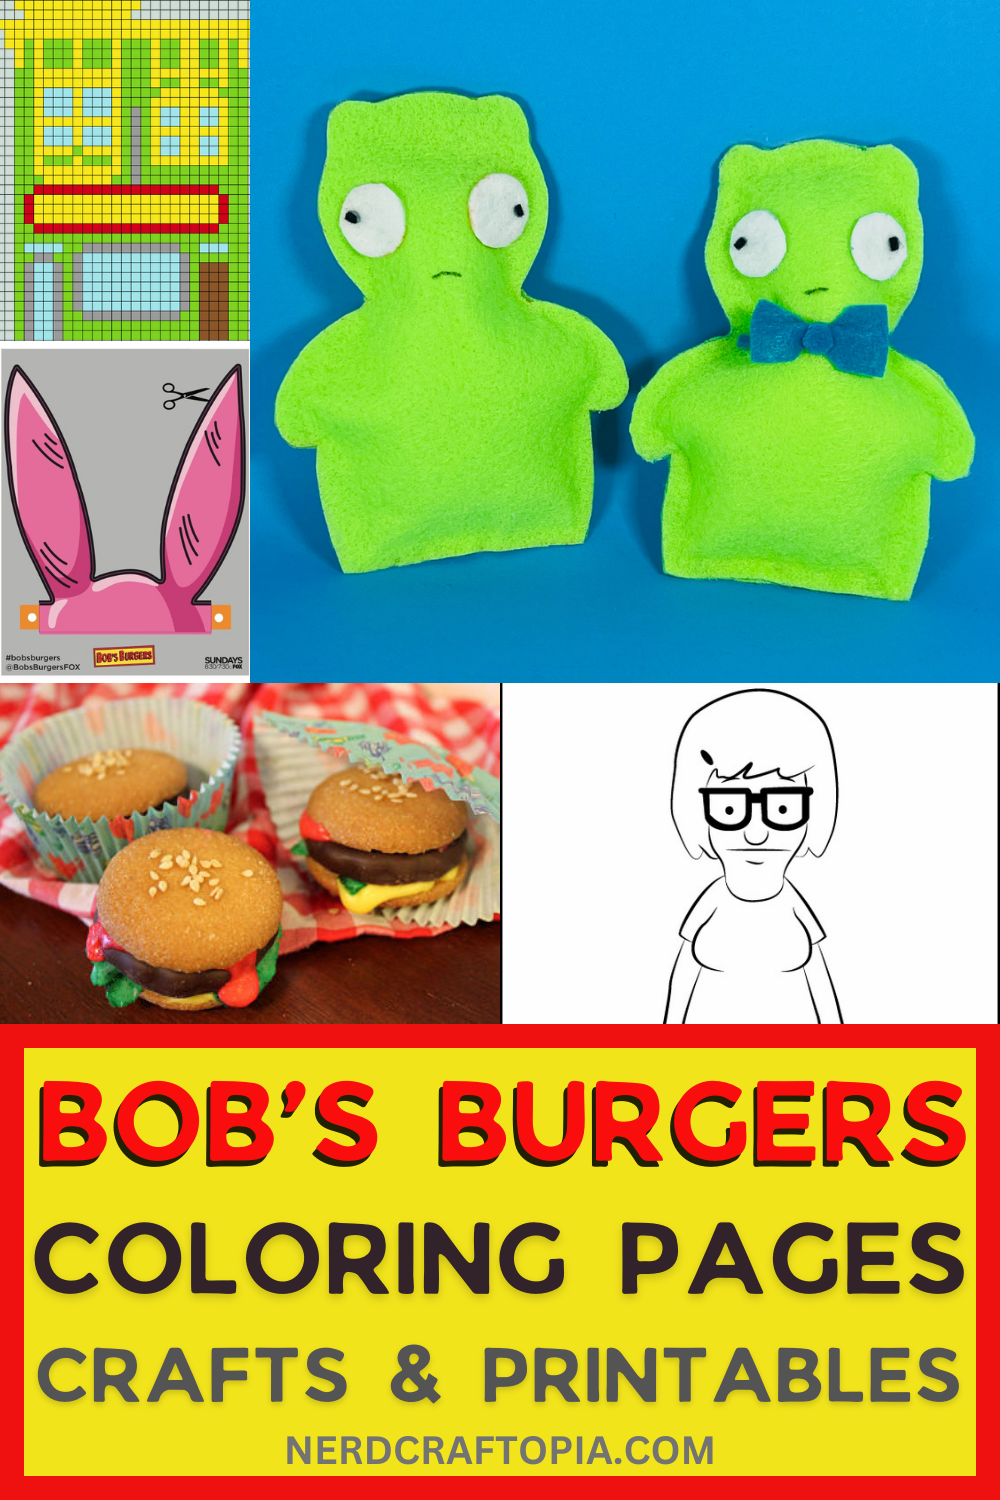 Bob's Burger's Coloring Pages, Crafts and Printables